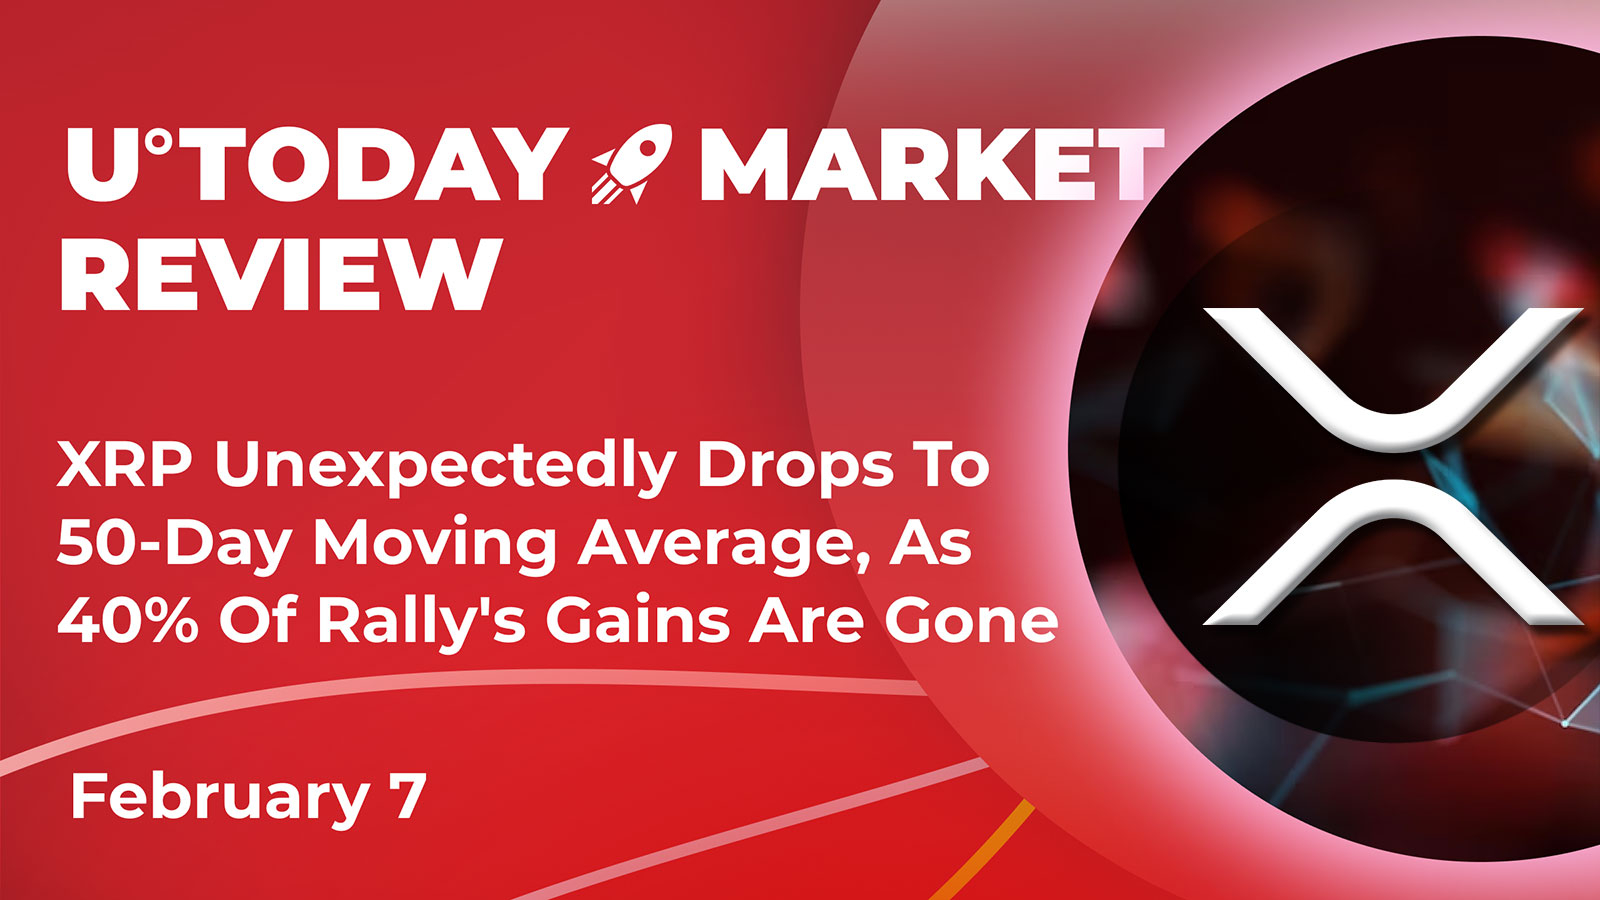 XRP Unexpectedly Drops to 50-Day Moving Average as 40% of Rally's Gains Are Gone